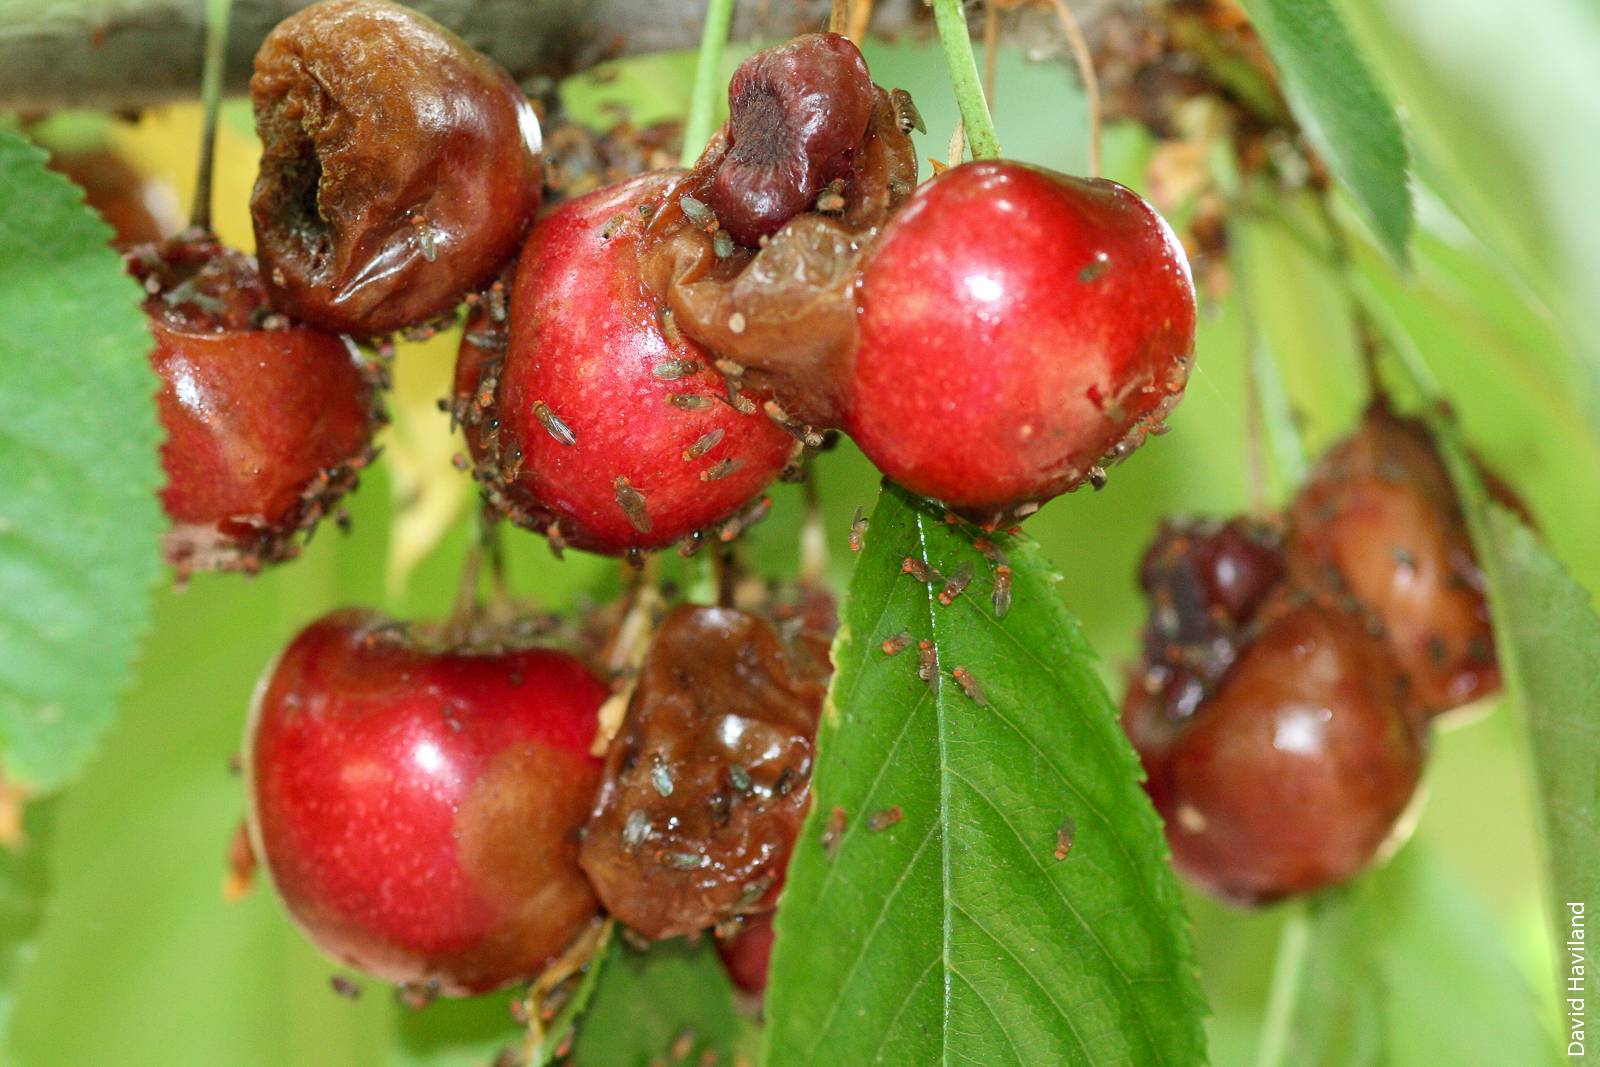 Spotted wing drosophila introduces microbes into cherry fruit before harvest. As fruit begin to rot, they become highly attractive to other drosophila species.